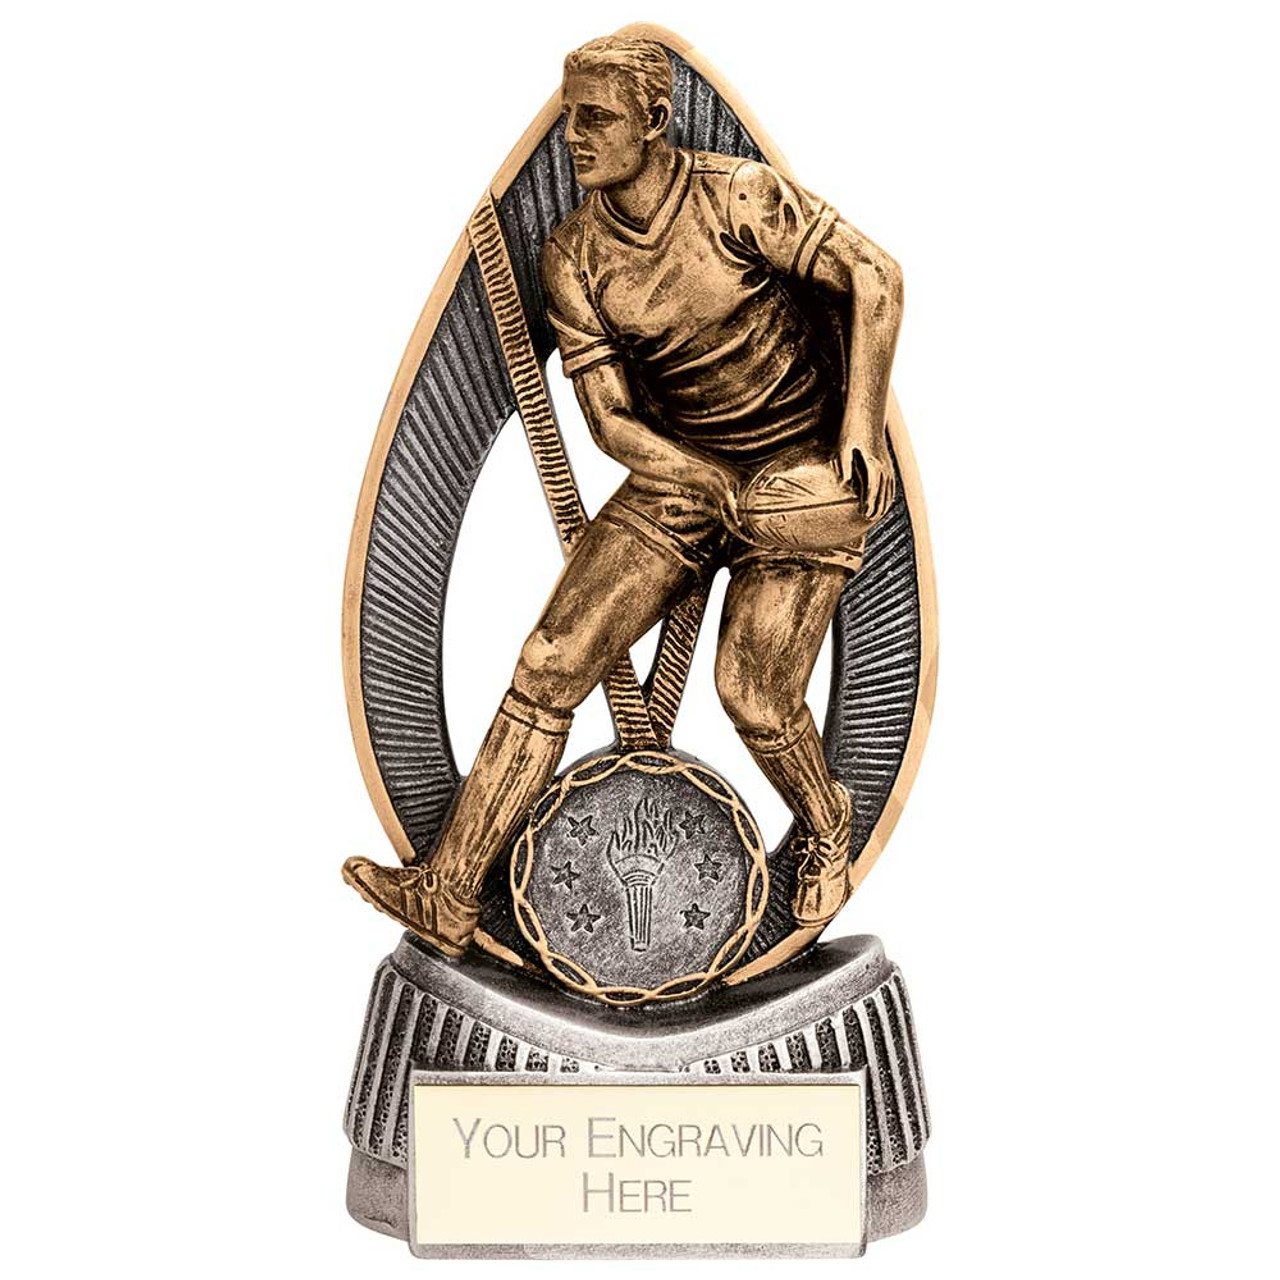 Rugby Award Male Figure 5.5" Havoc Trophy Silver & Bronze Prize Rugby League Rugby Union Rugby Club